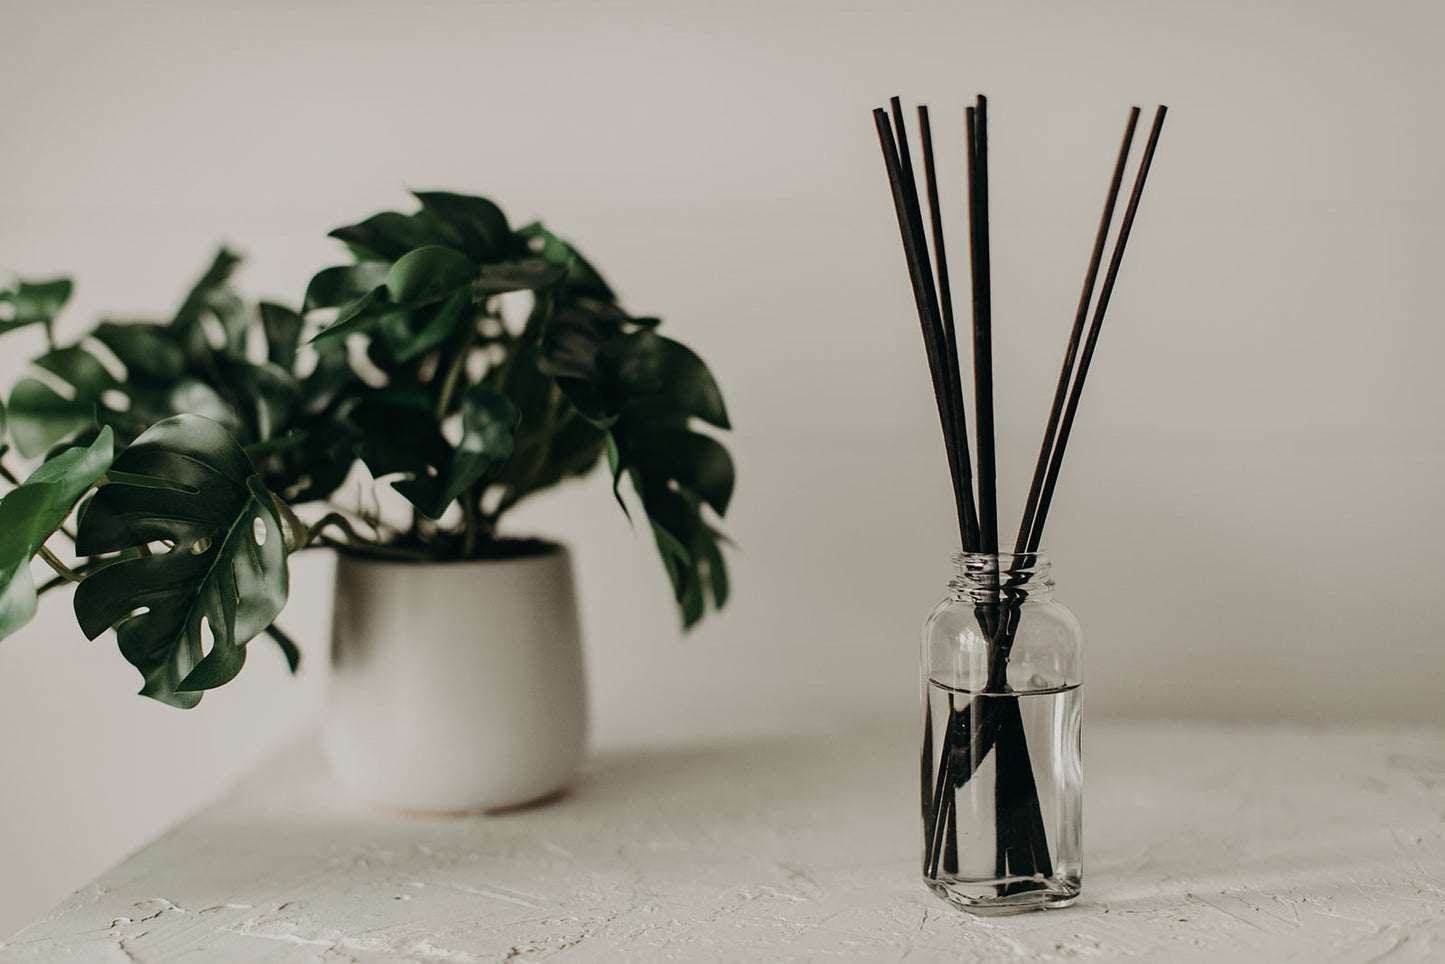 White Sands Reed Diffuser